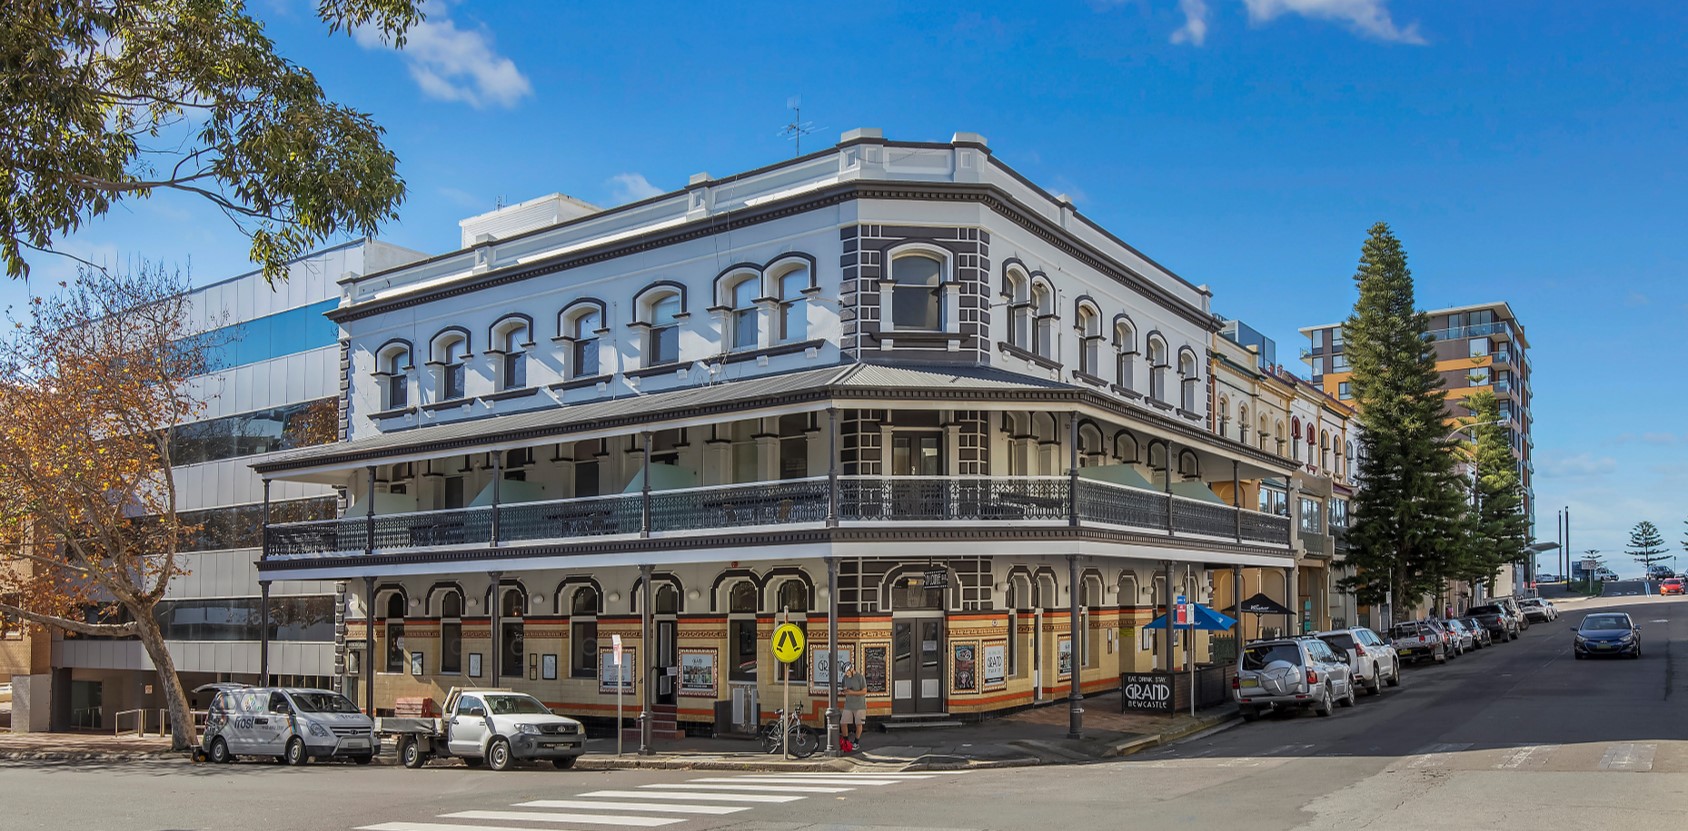 Newcastle East hotel trades after 33 years  realestatesource